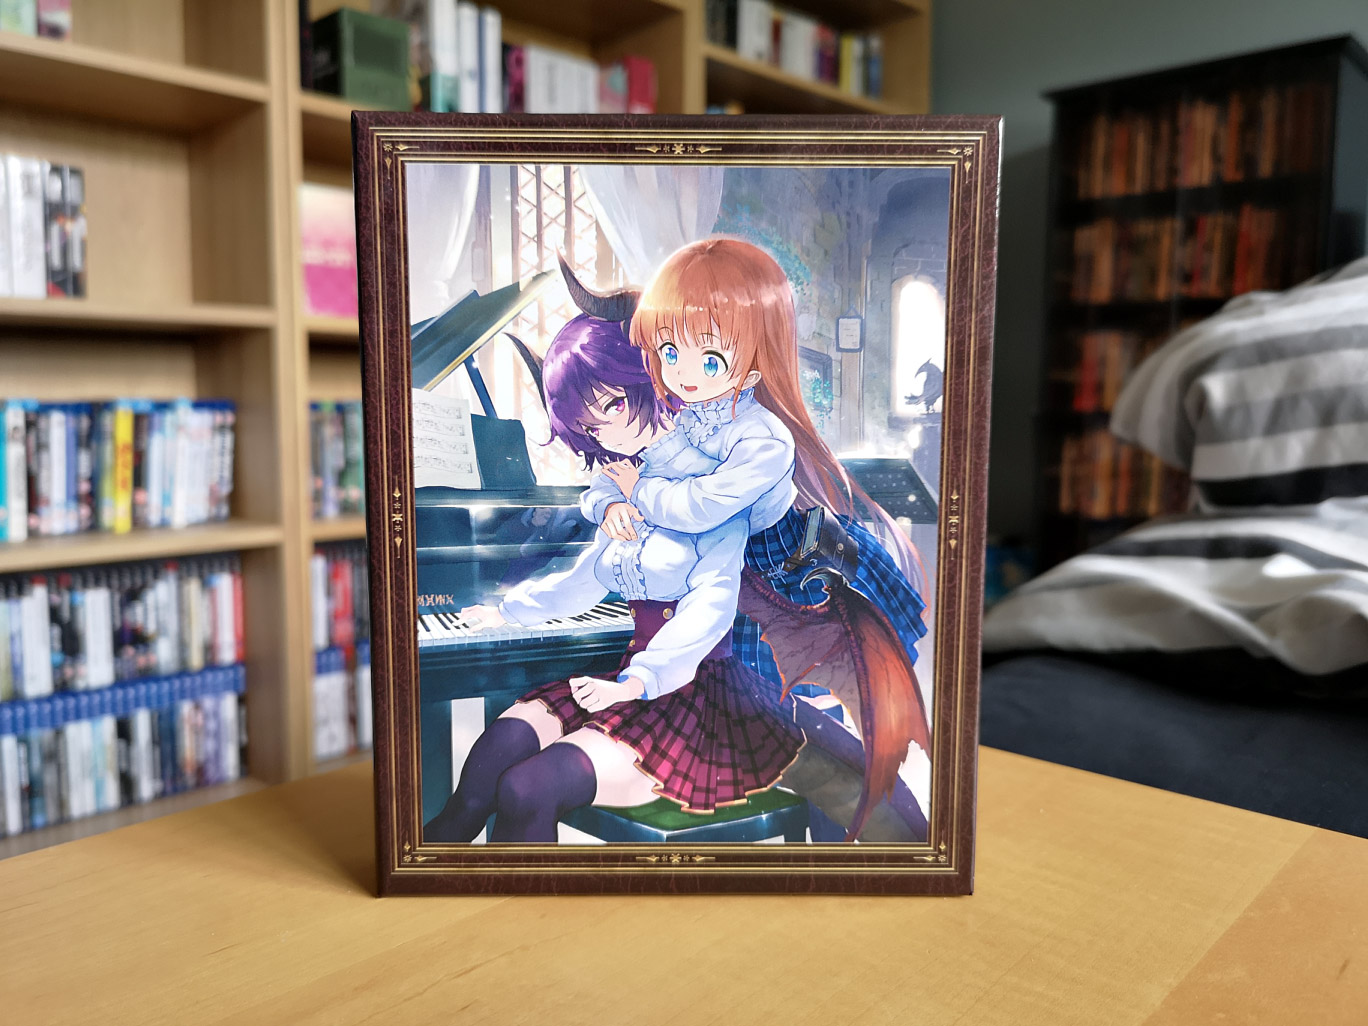 AmiAmi [Character & Hobby Shop]  BD Manaria Friends I (Blu-ray  Disc)(Released)